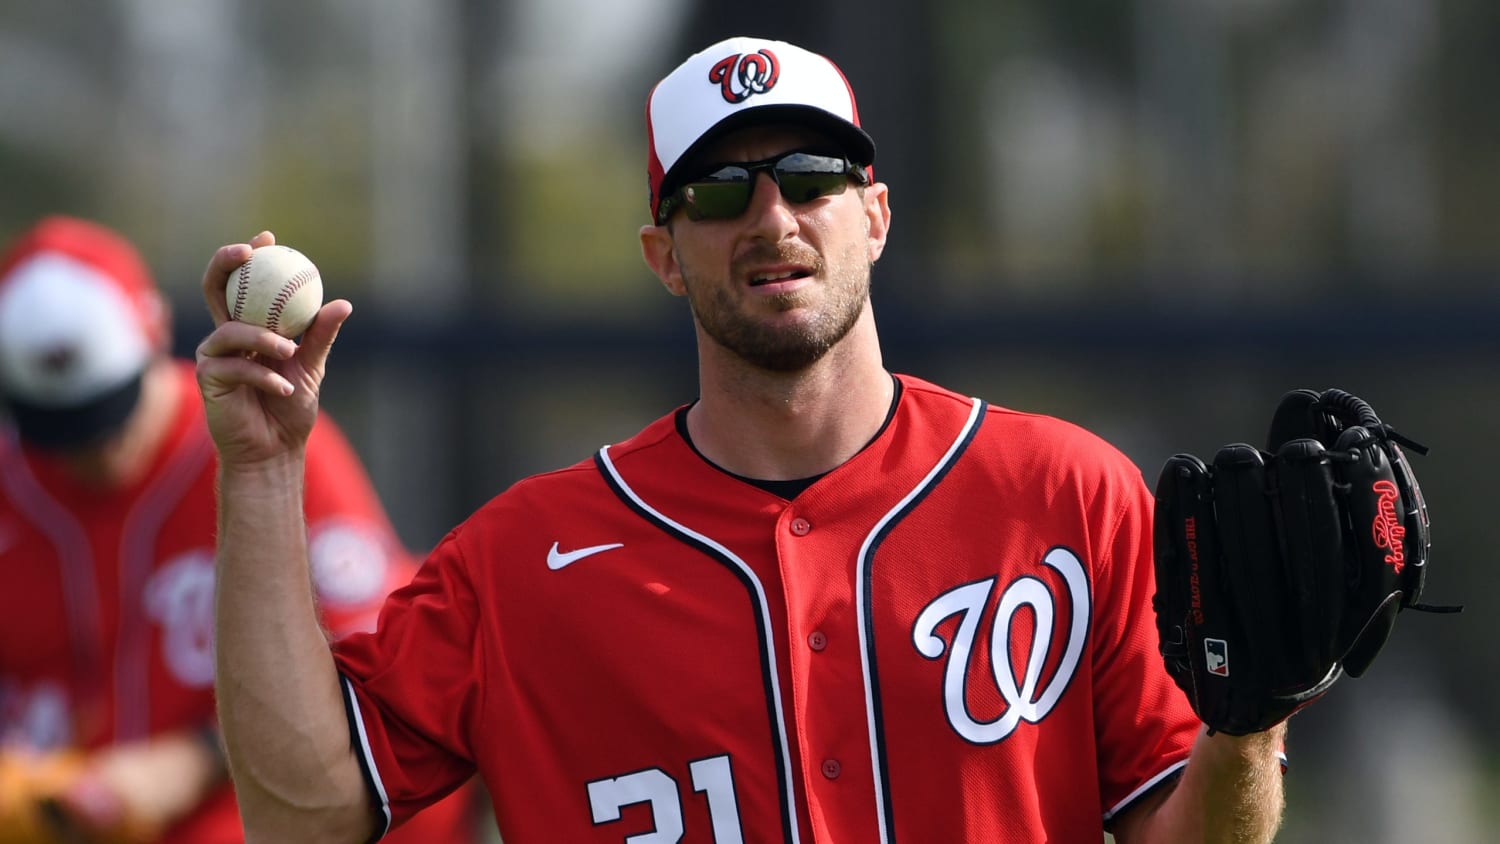 'No justification to accept a 2nd pay cut': Washington Nationals' Max Scherzer speaks out against MLB proposal